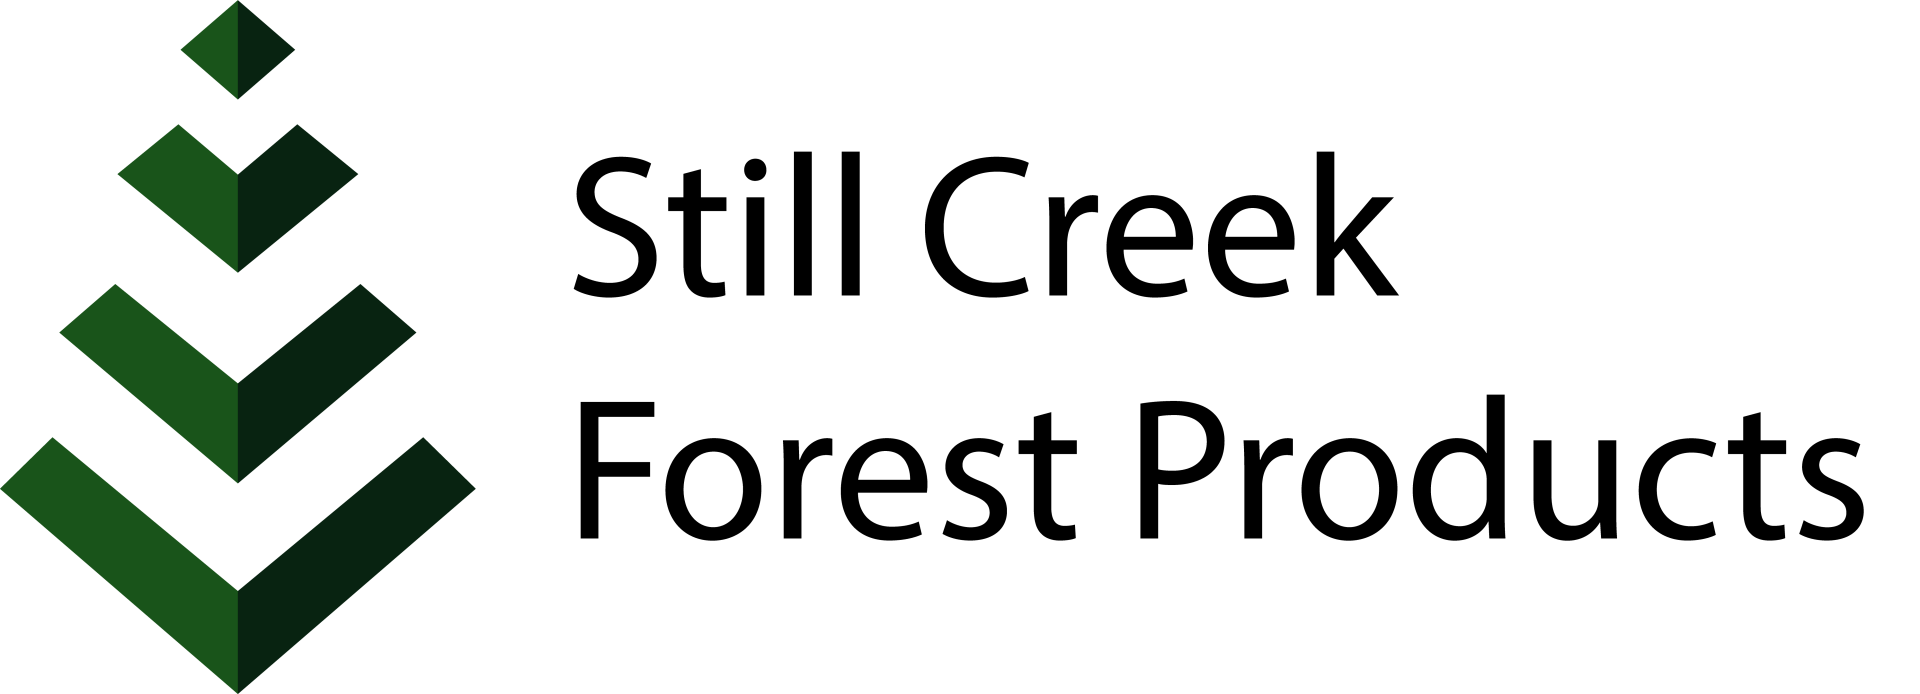 Still creek forest products